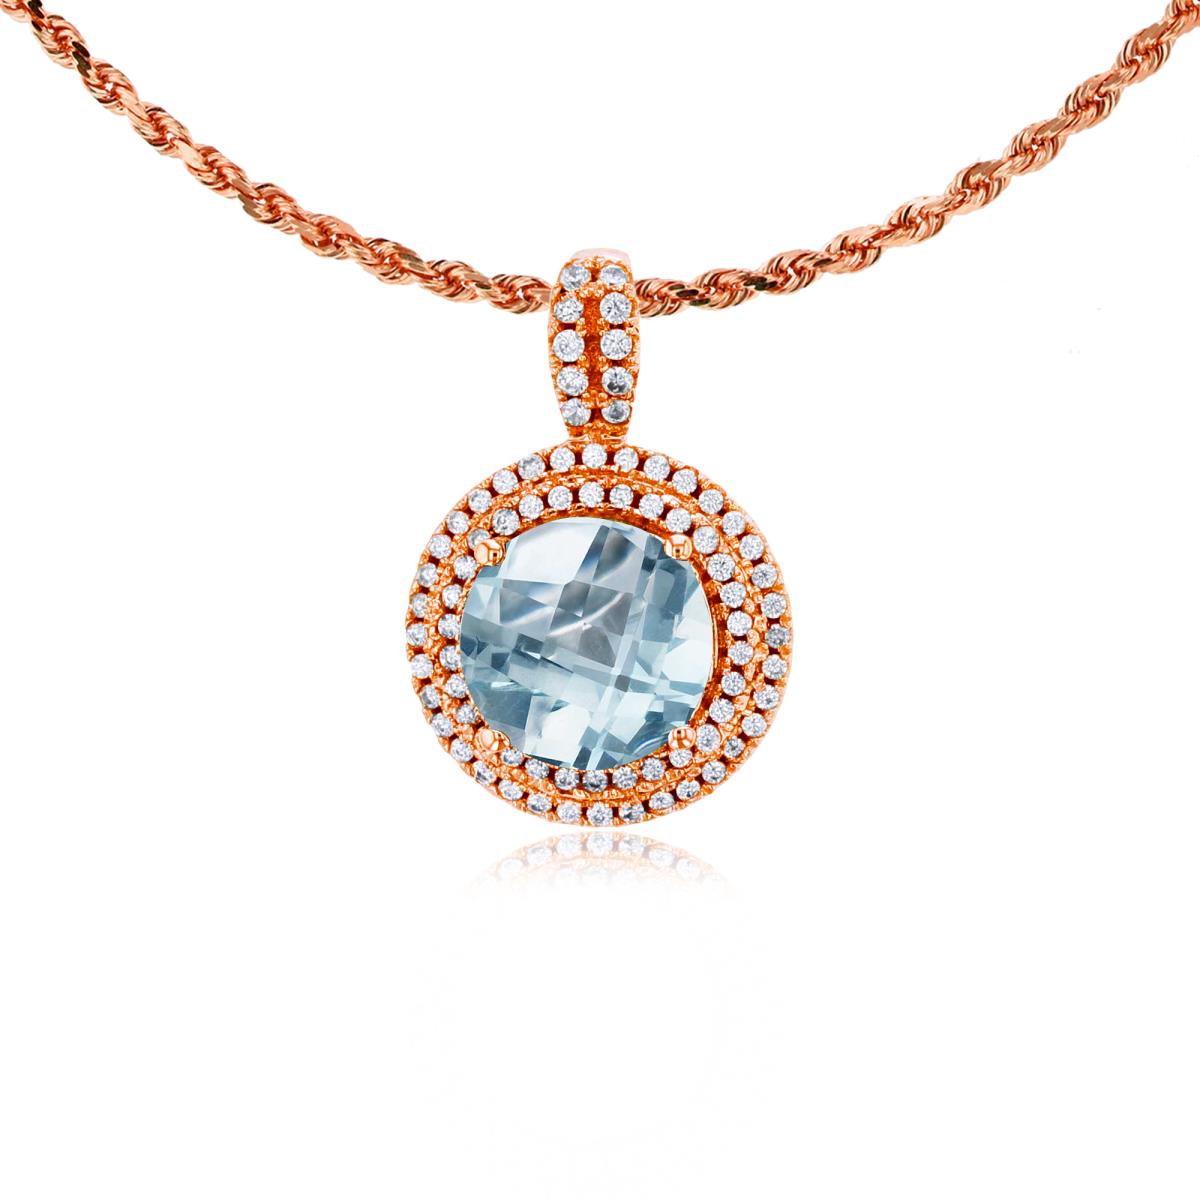 10K Rose Gold 7mm Round Aquamarine & 0.25 CTTW Diamonds Double Halo 18" Rope Chain Necklace